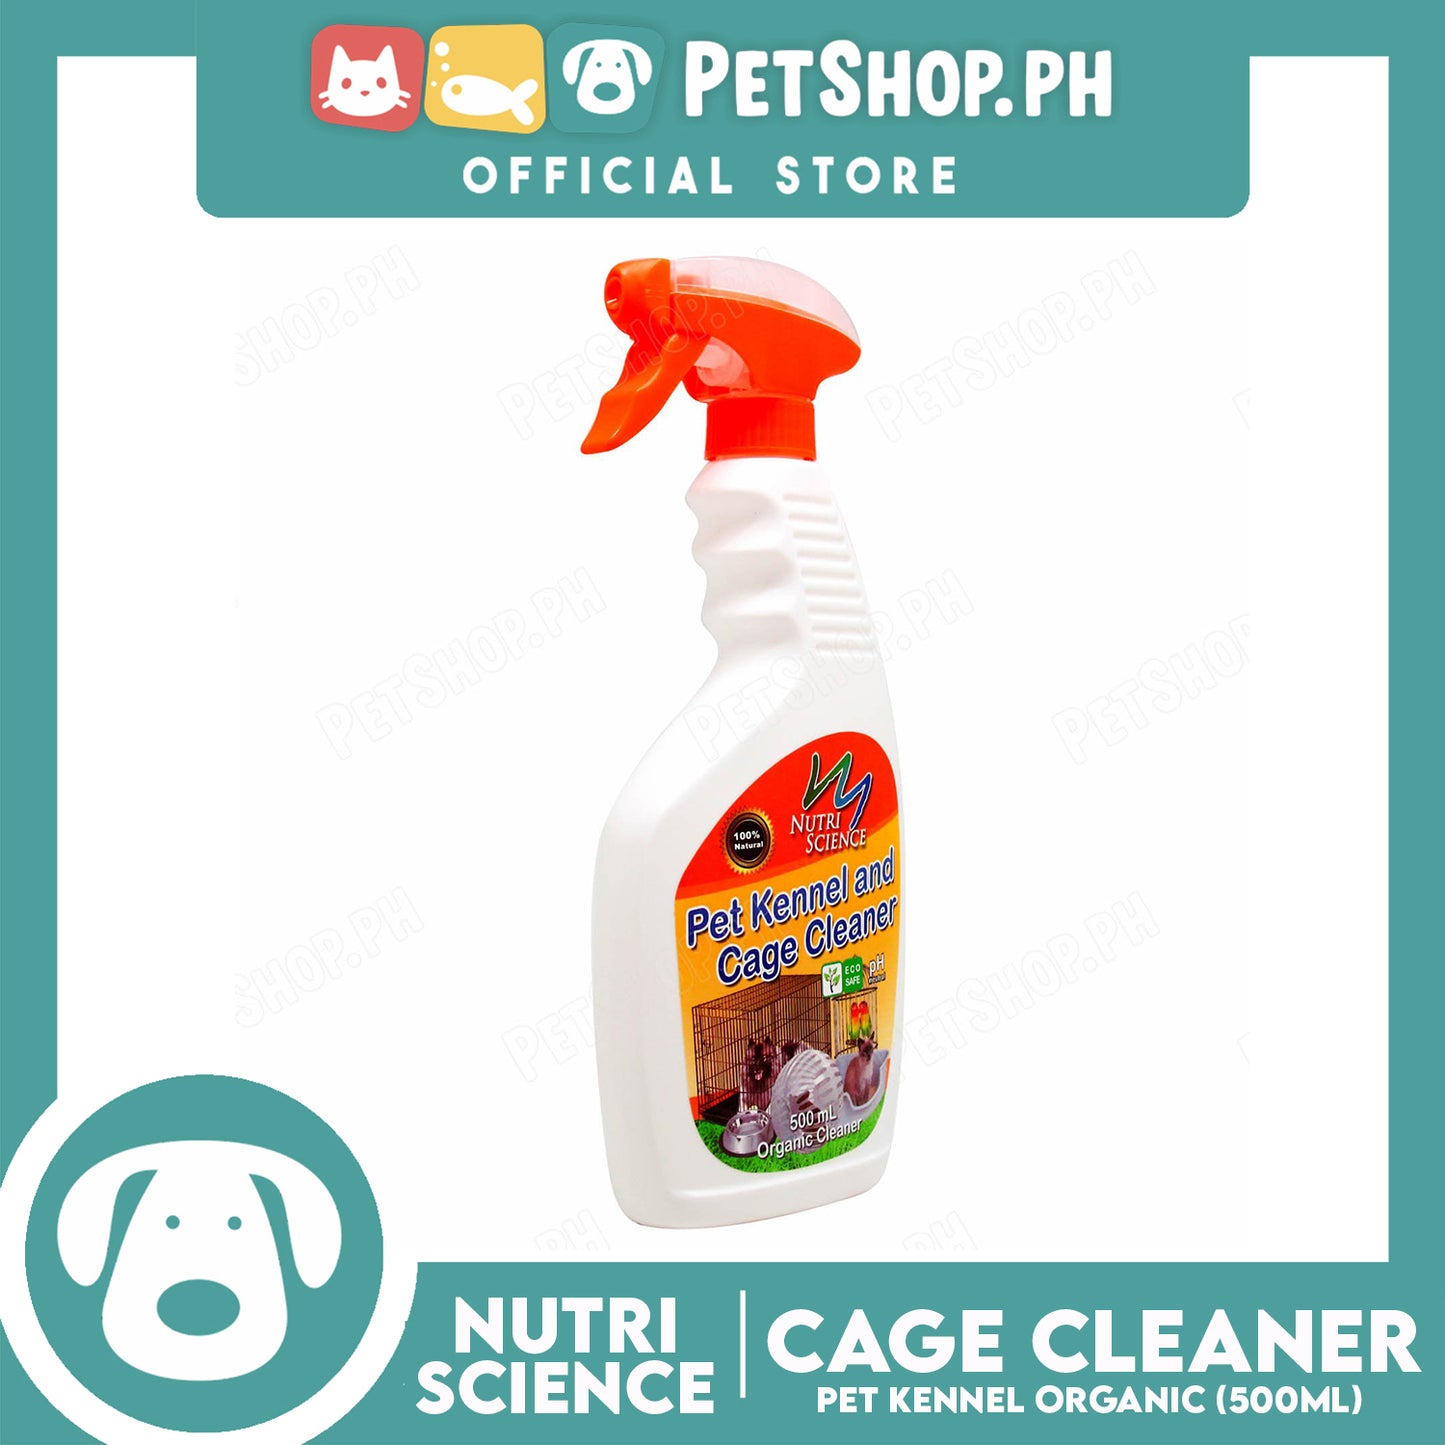 Nutri Science Pet Kennel and Cage Cleaner 500ml